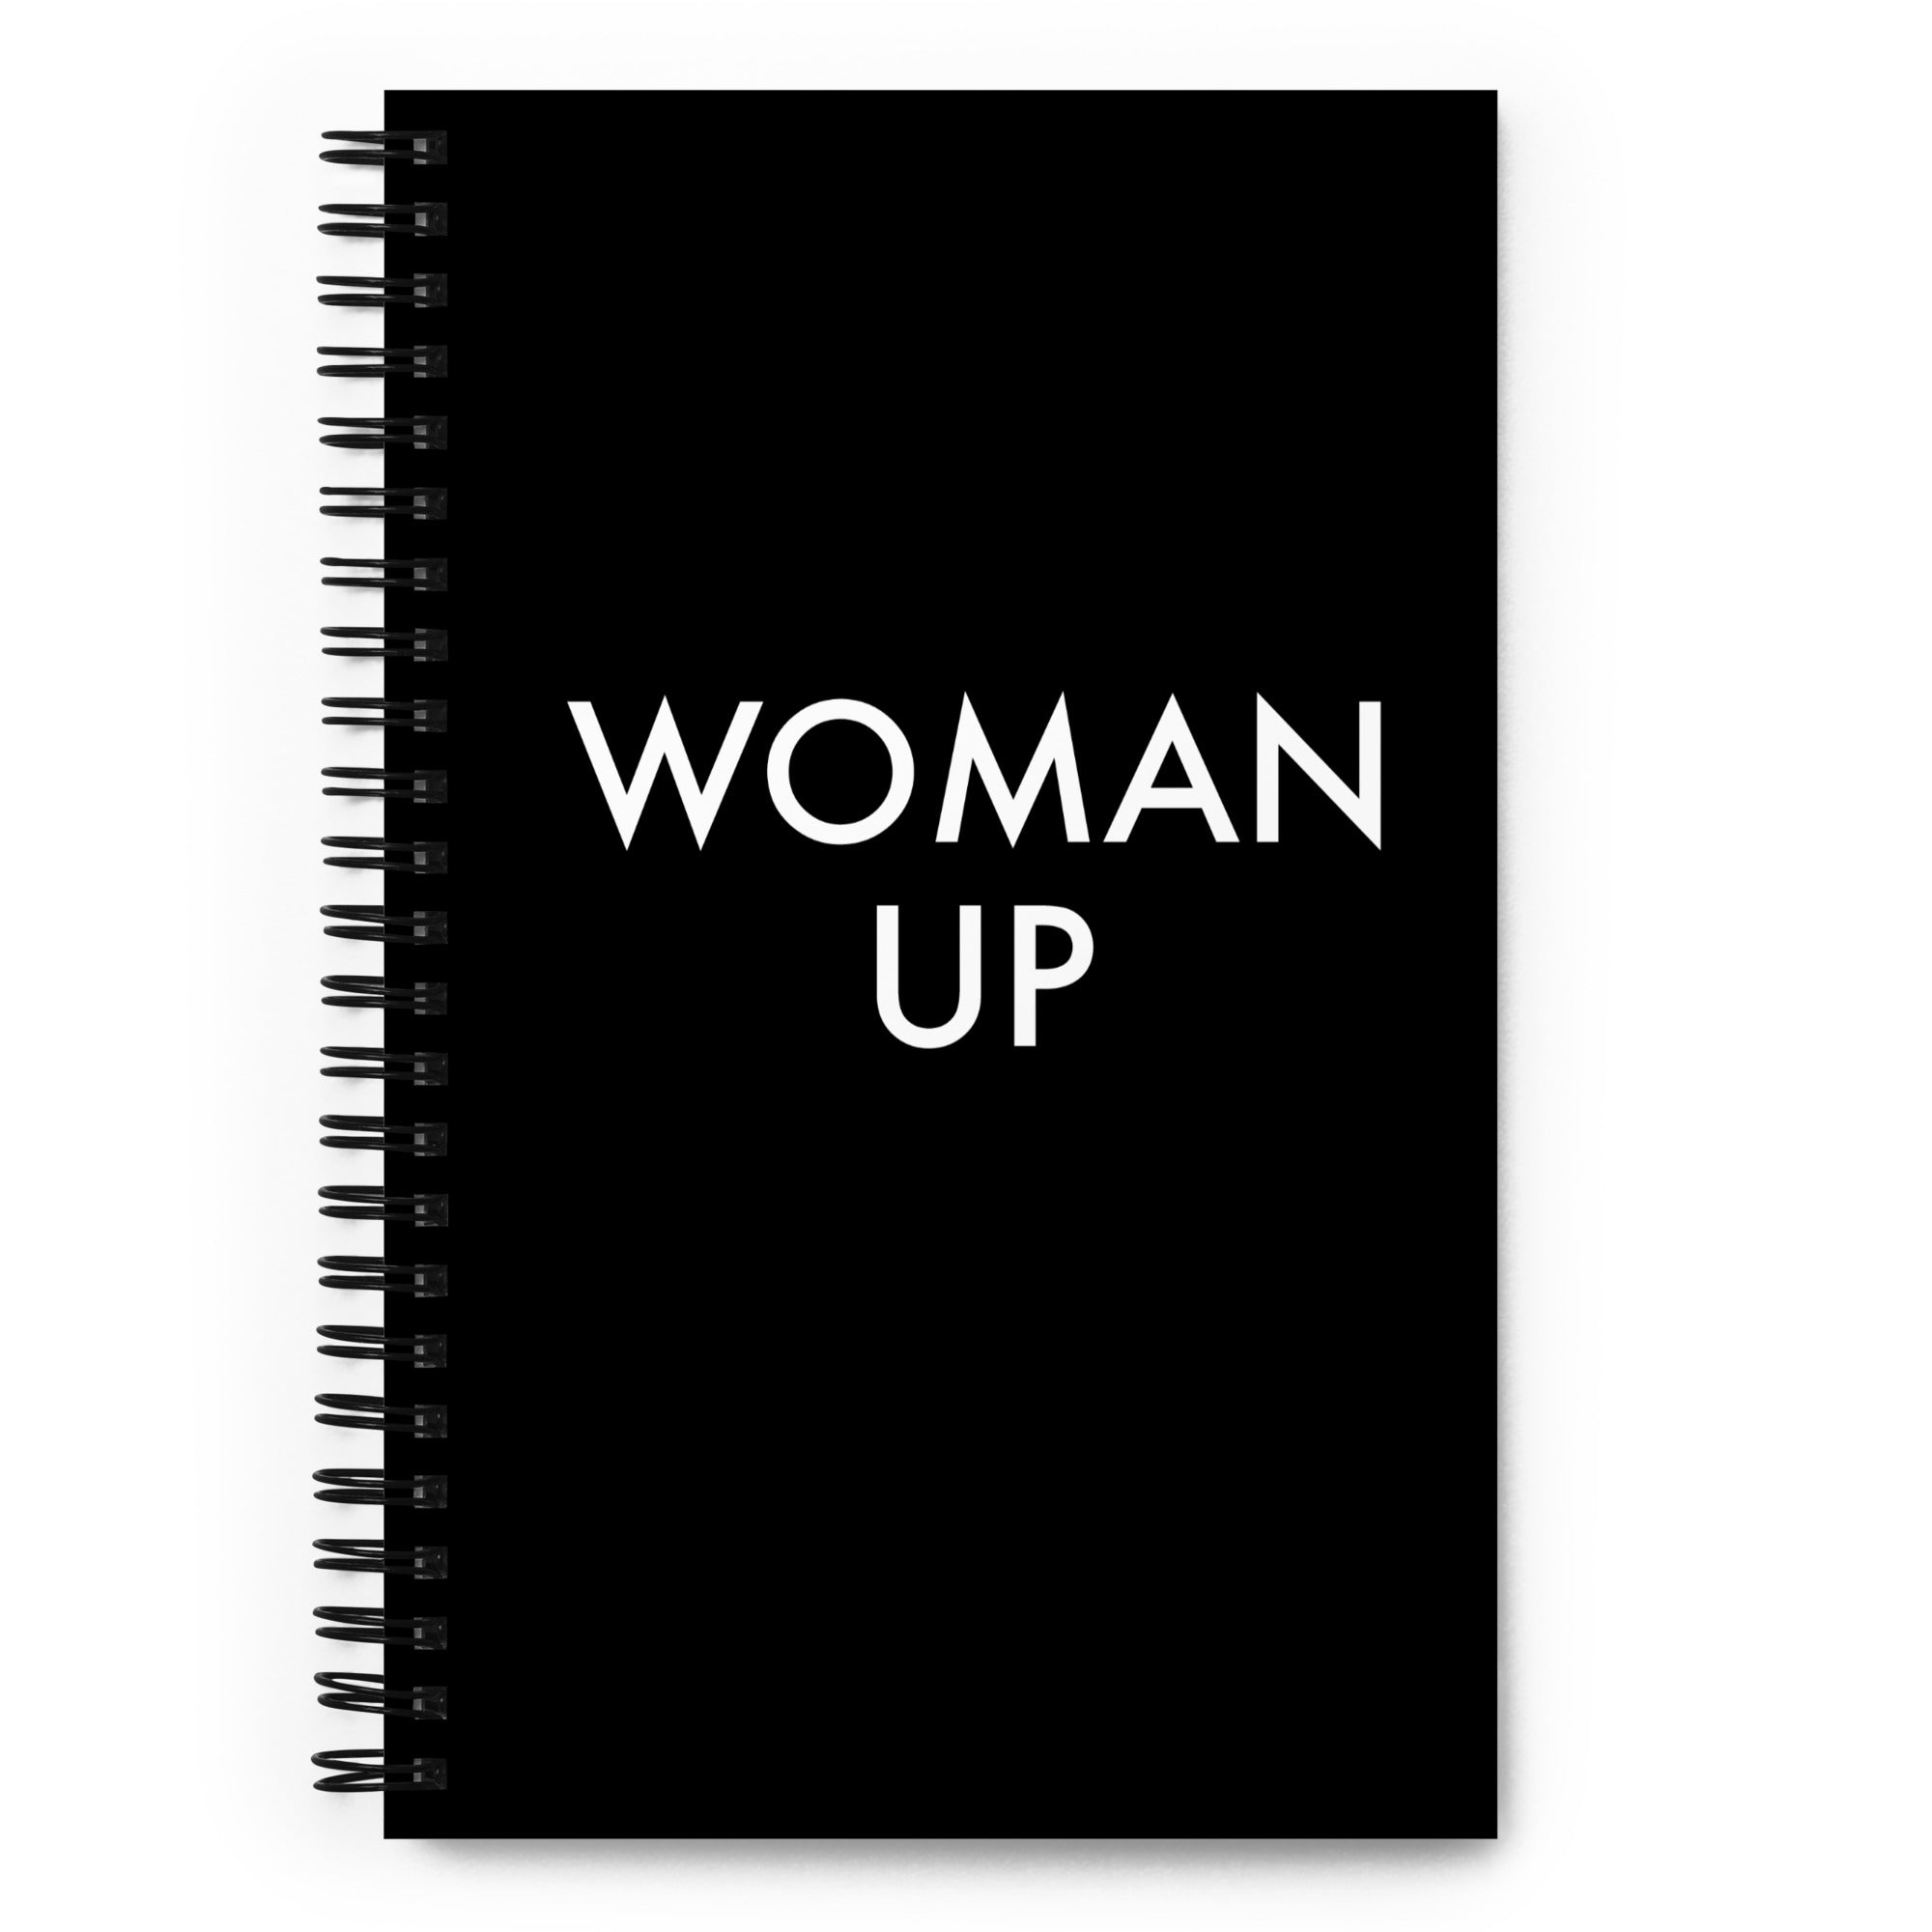 WOMAN UP NOTEBOOK